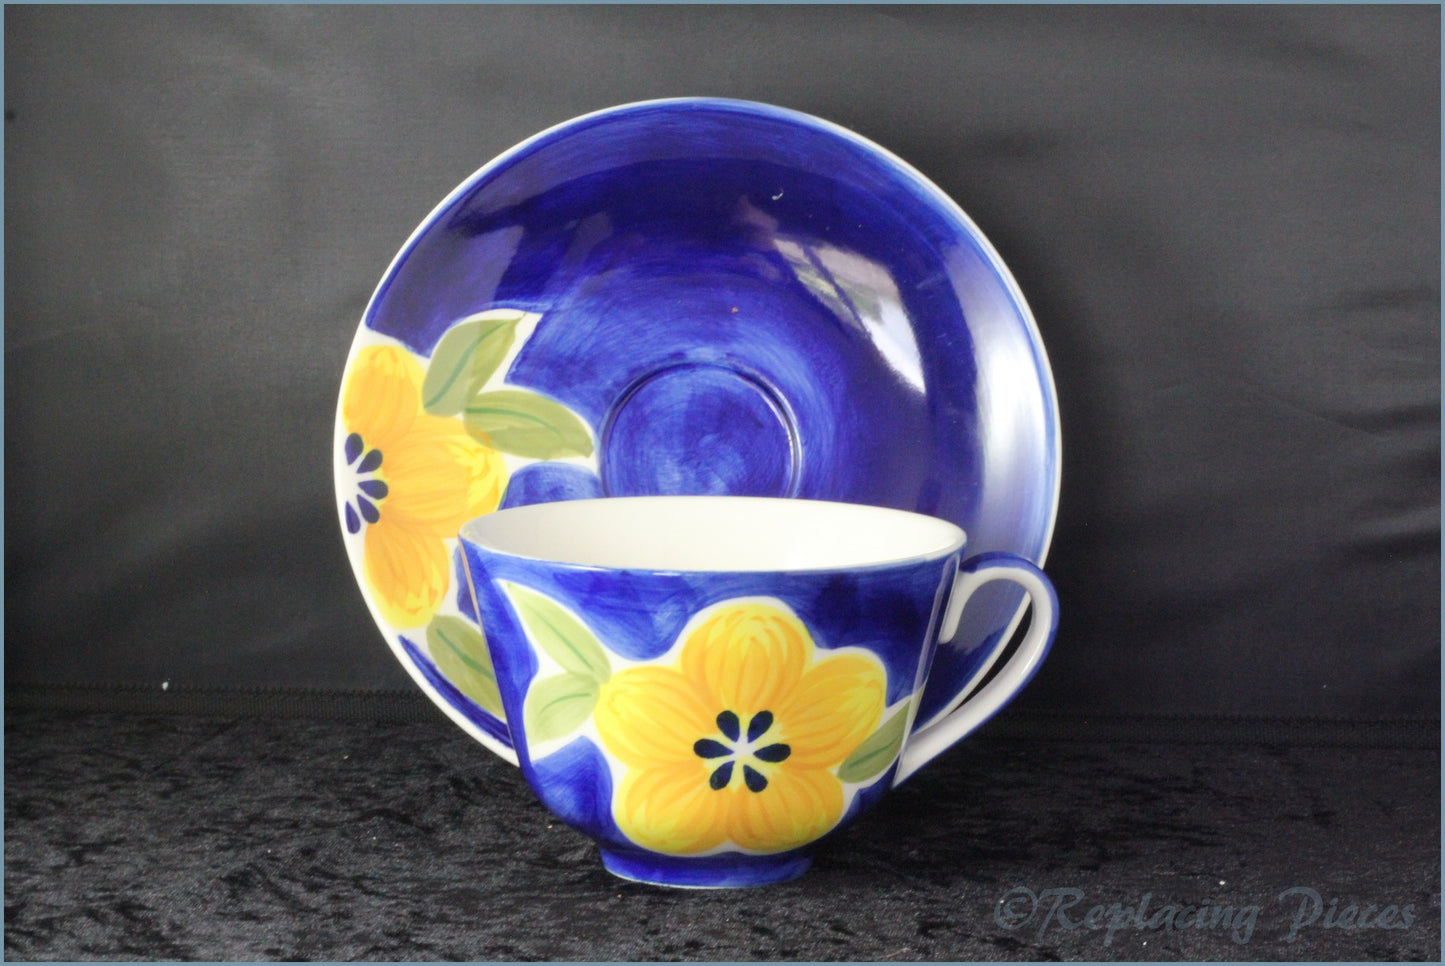 RPW40 - Whittards - Yellow Flower On Blue - Teacup & Saucer